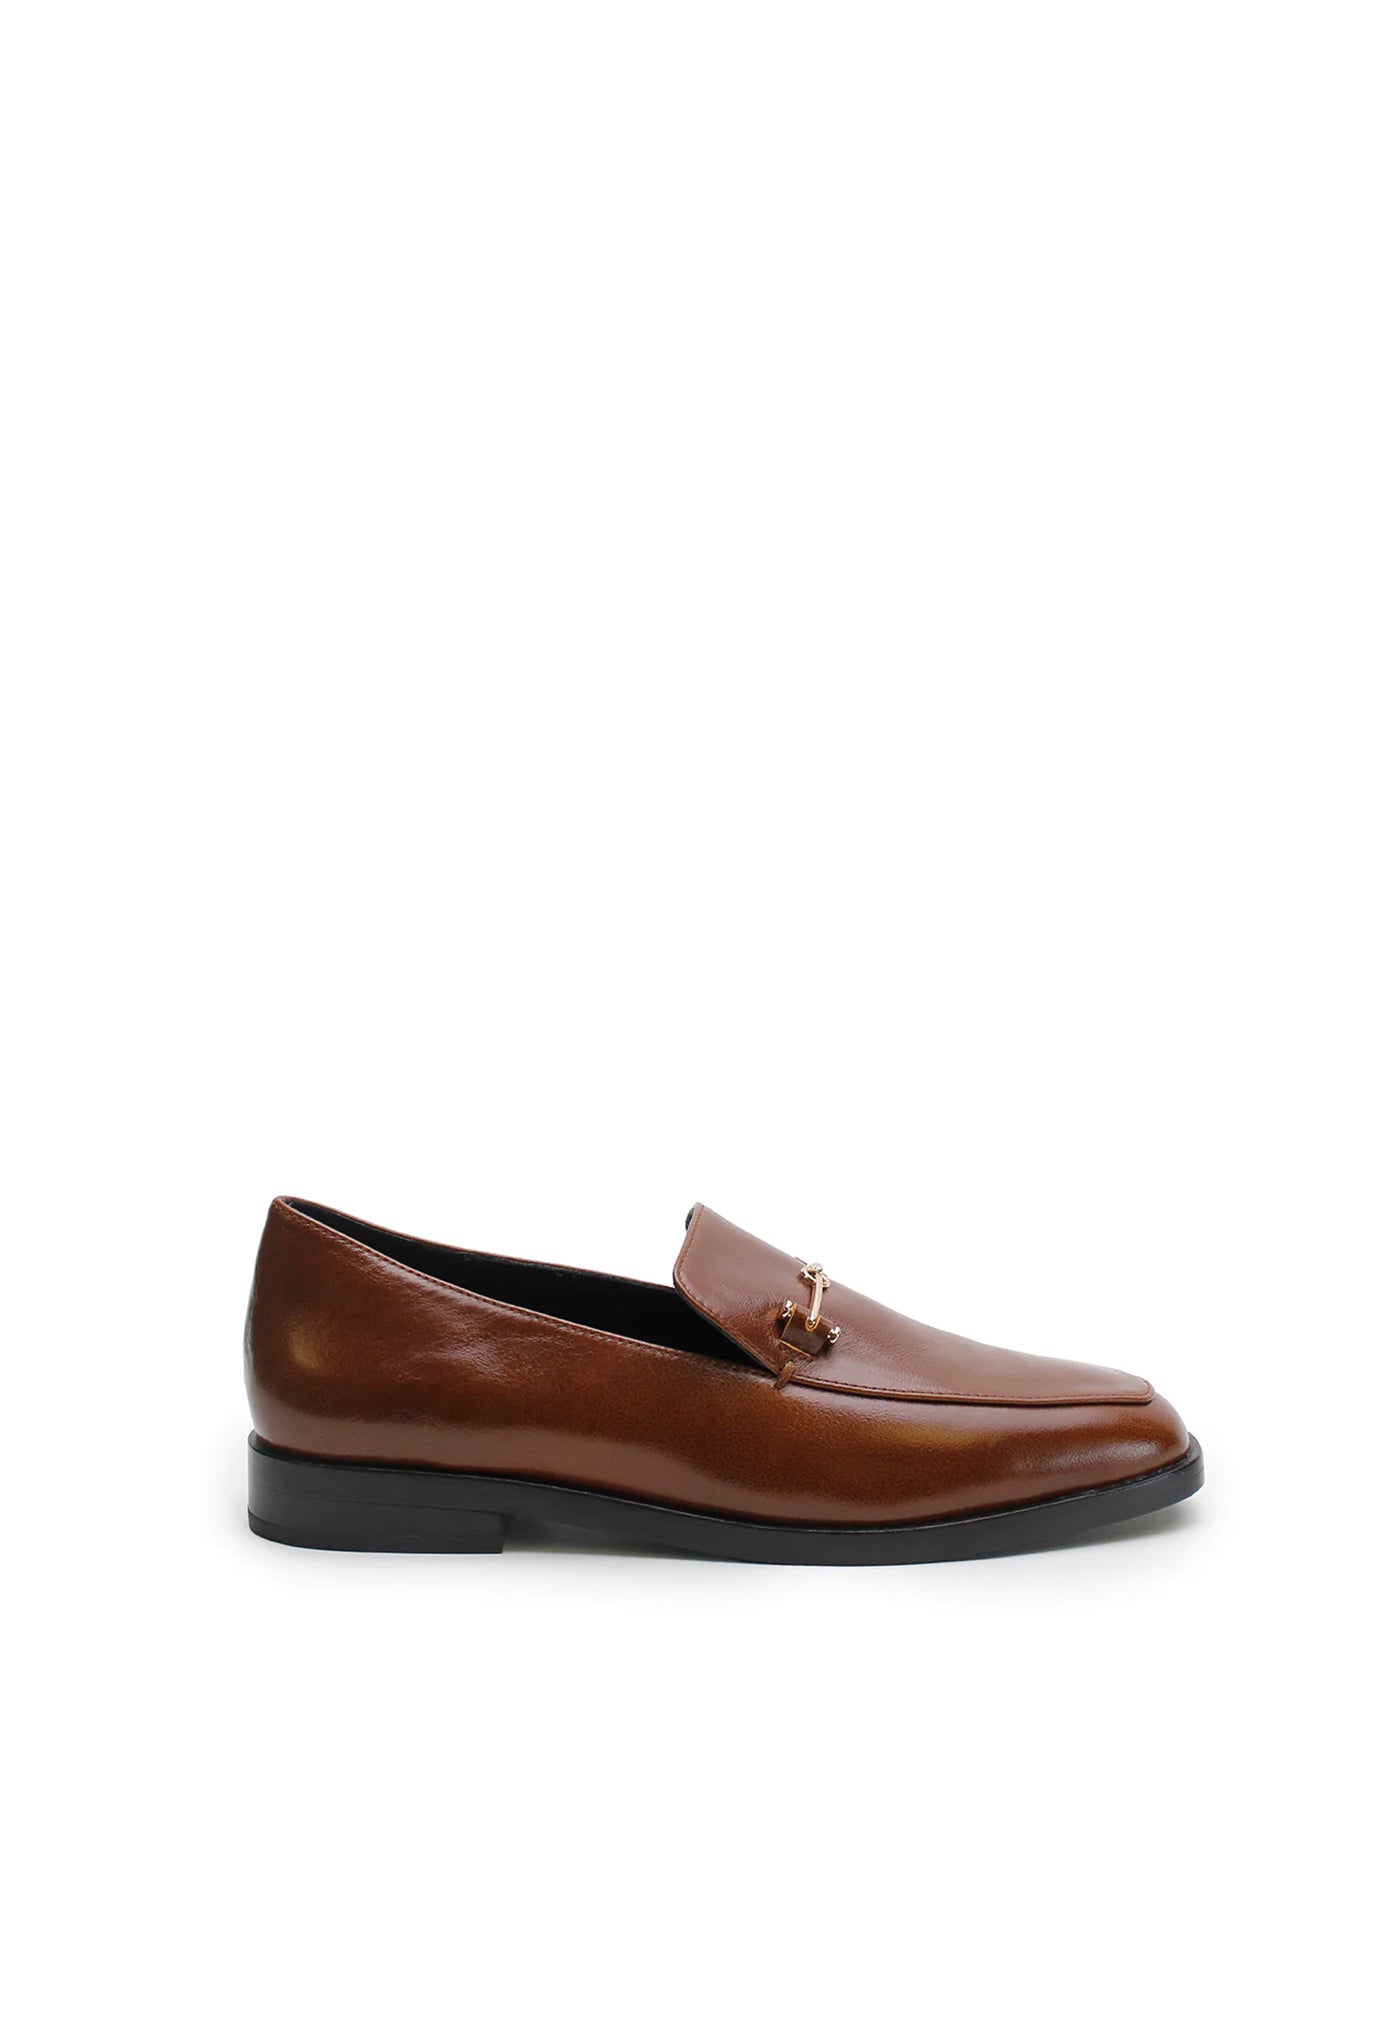 Suit Loafer - Pecan/Gold sold by Angel Divine